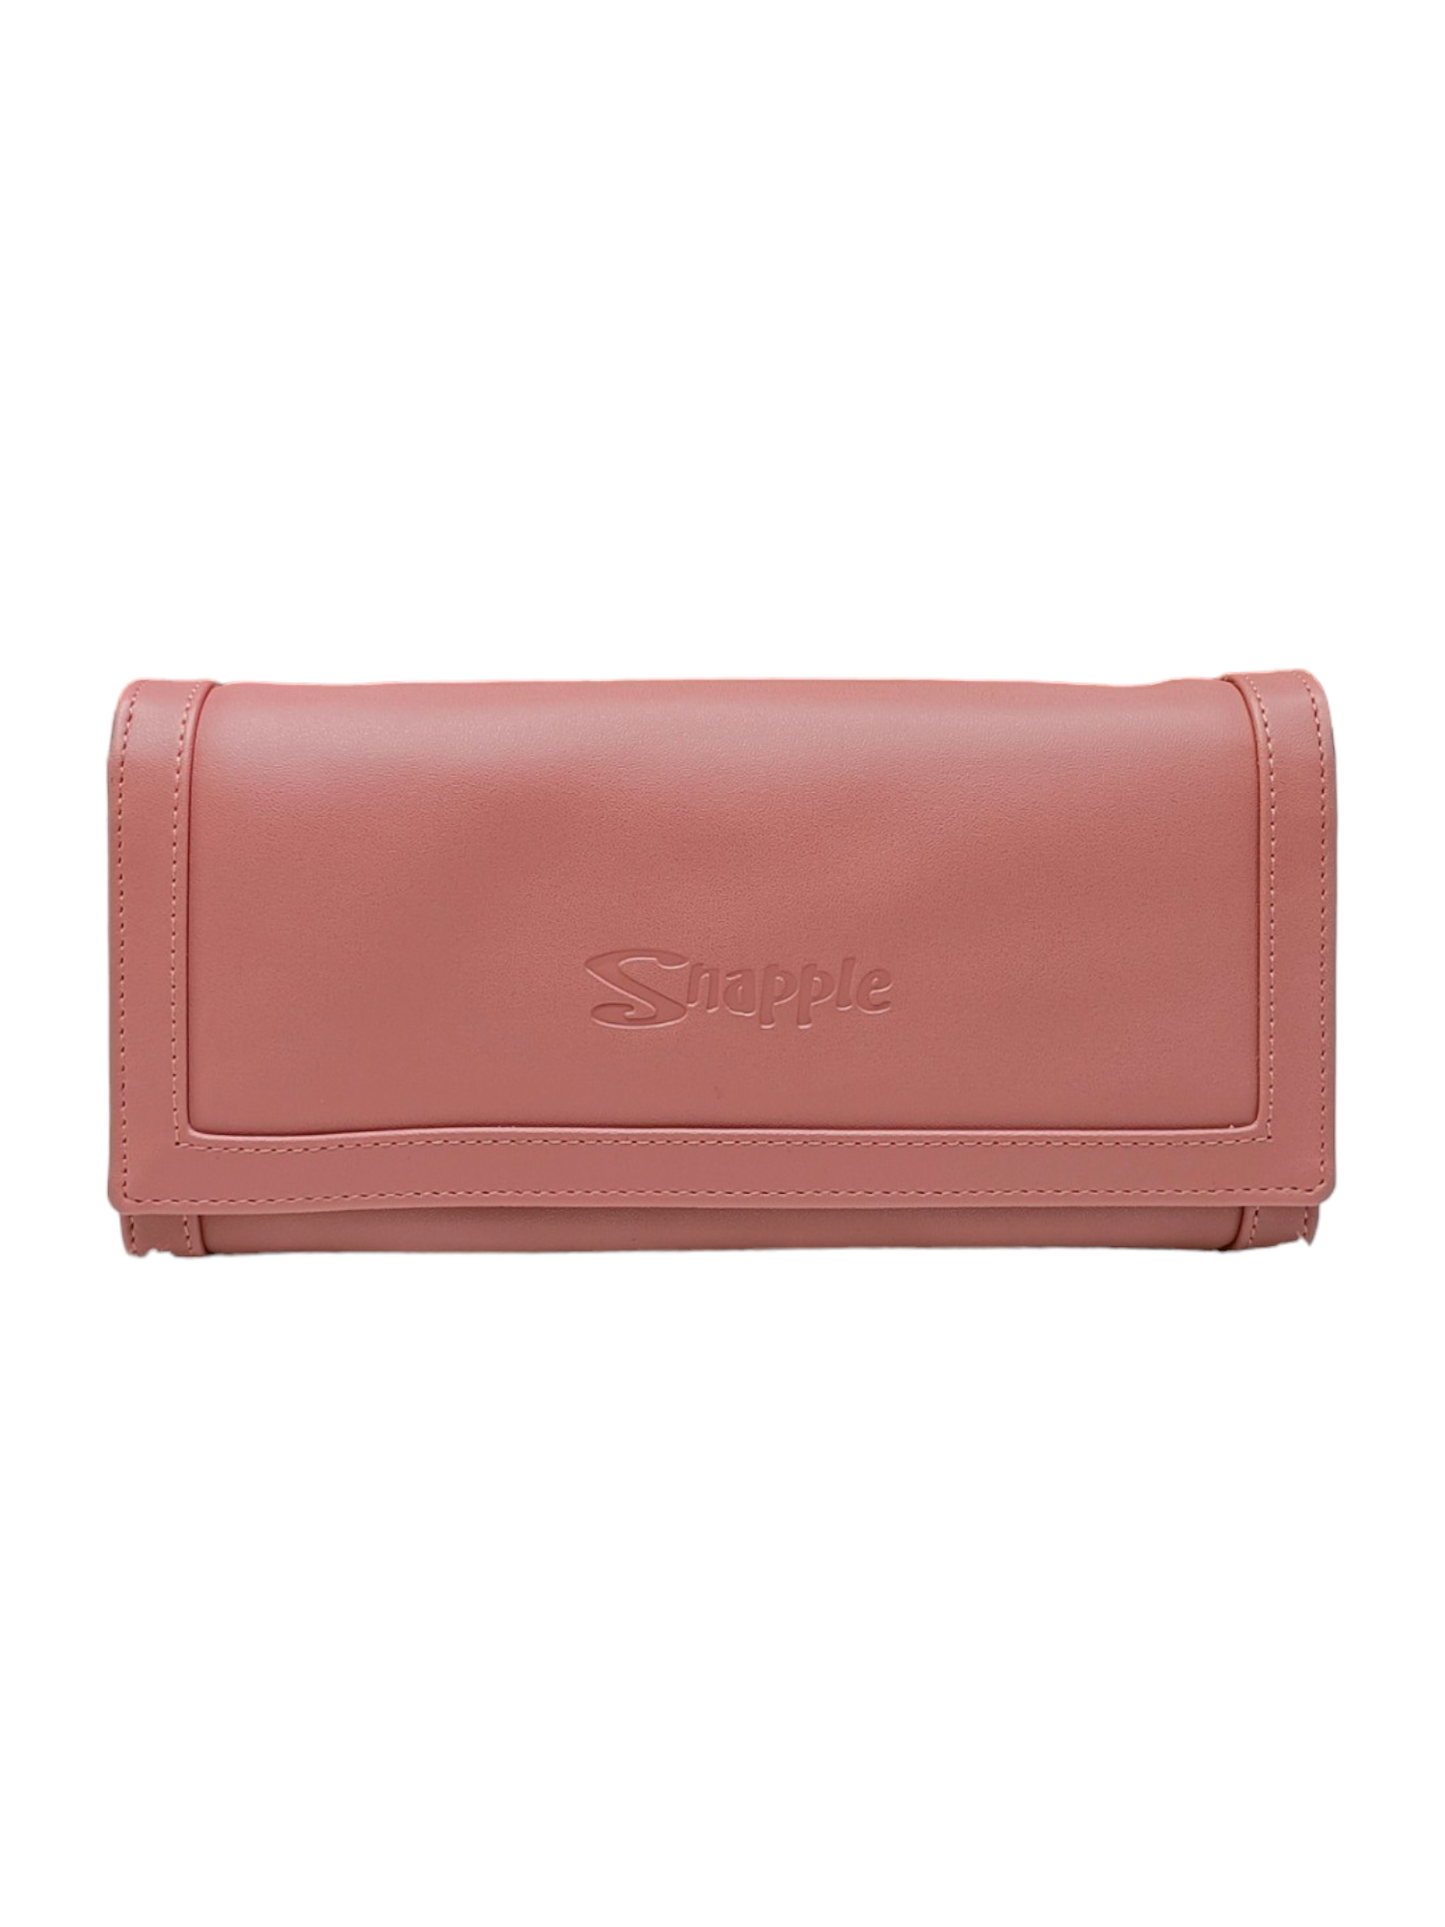 Abc's snapple super spacious with maximum pocket clutch, wallet